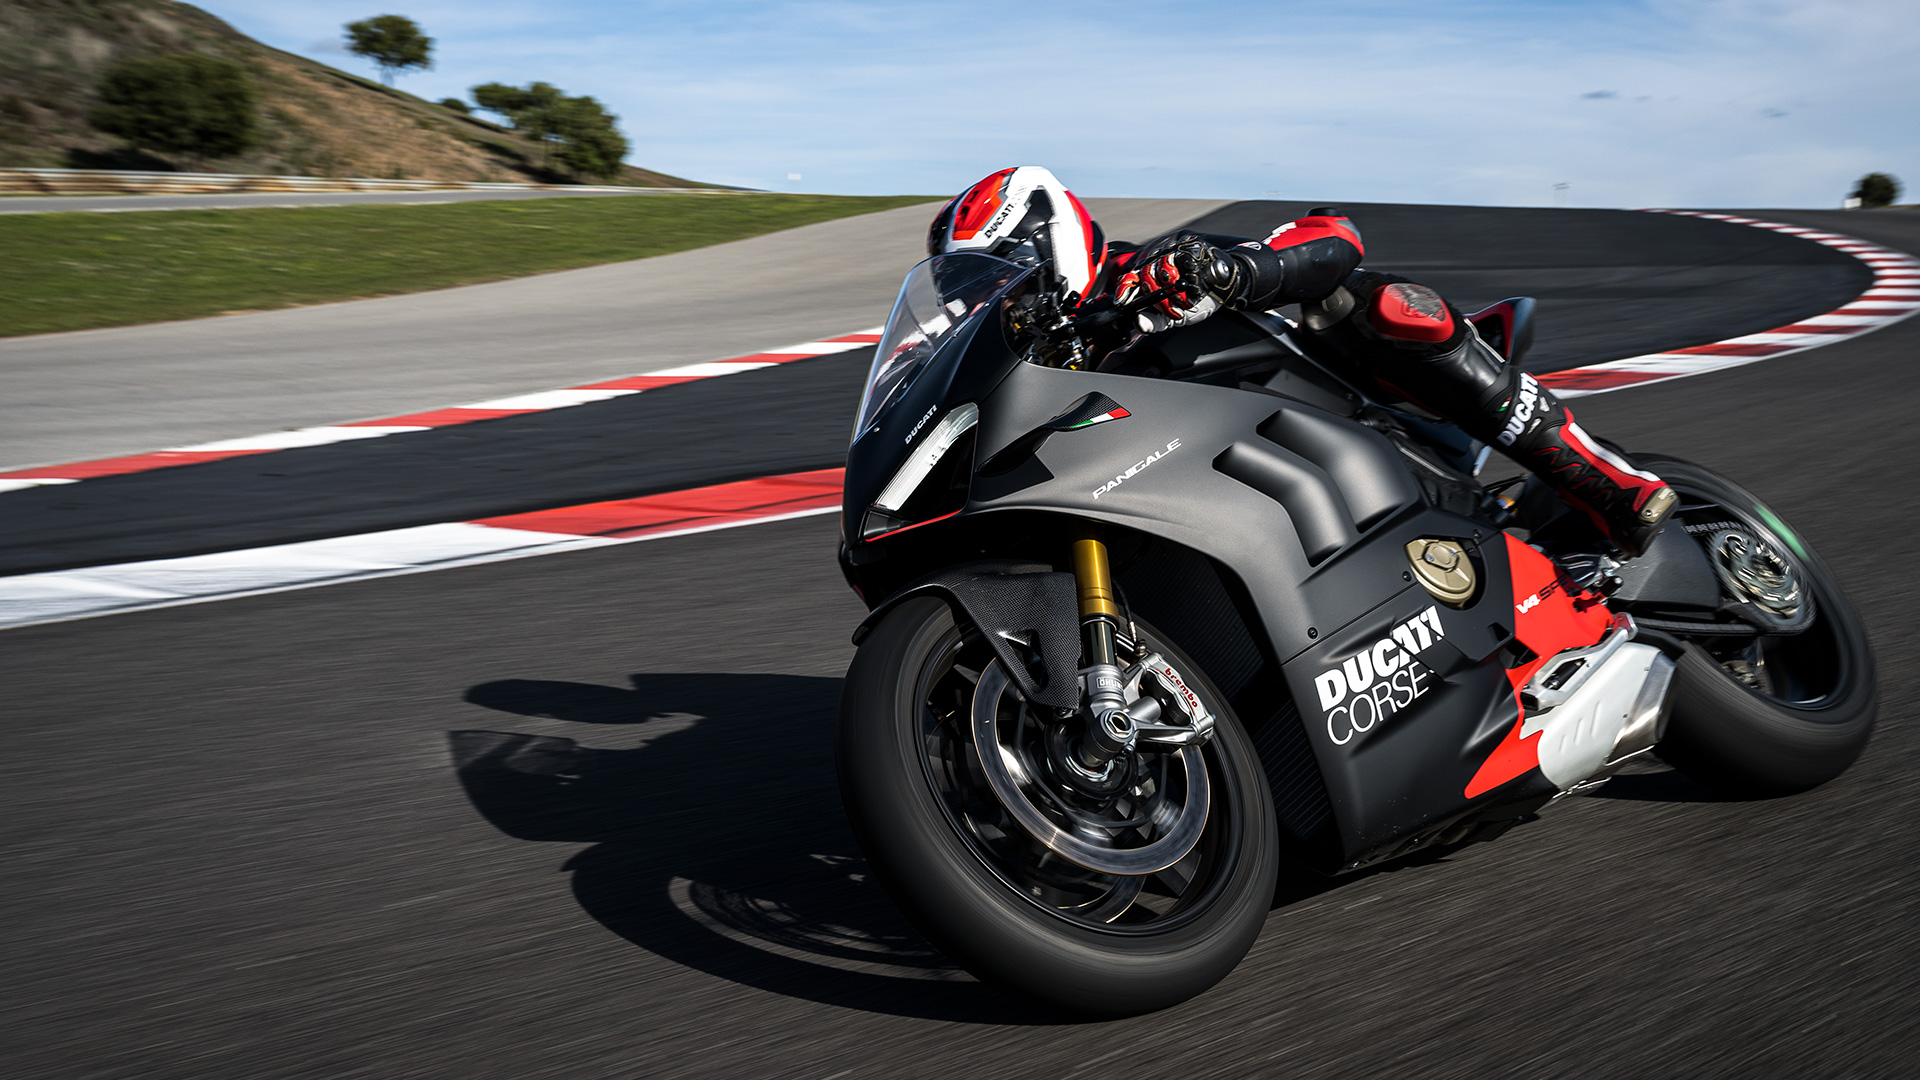 Panigale-V4-SP2-02-Track-gallery-1920x1080